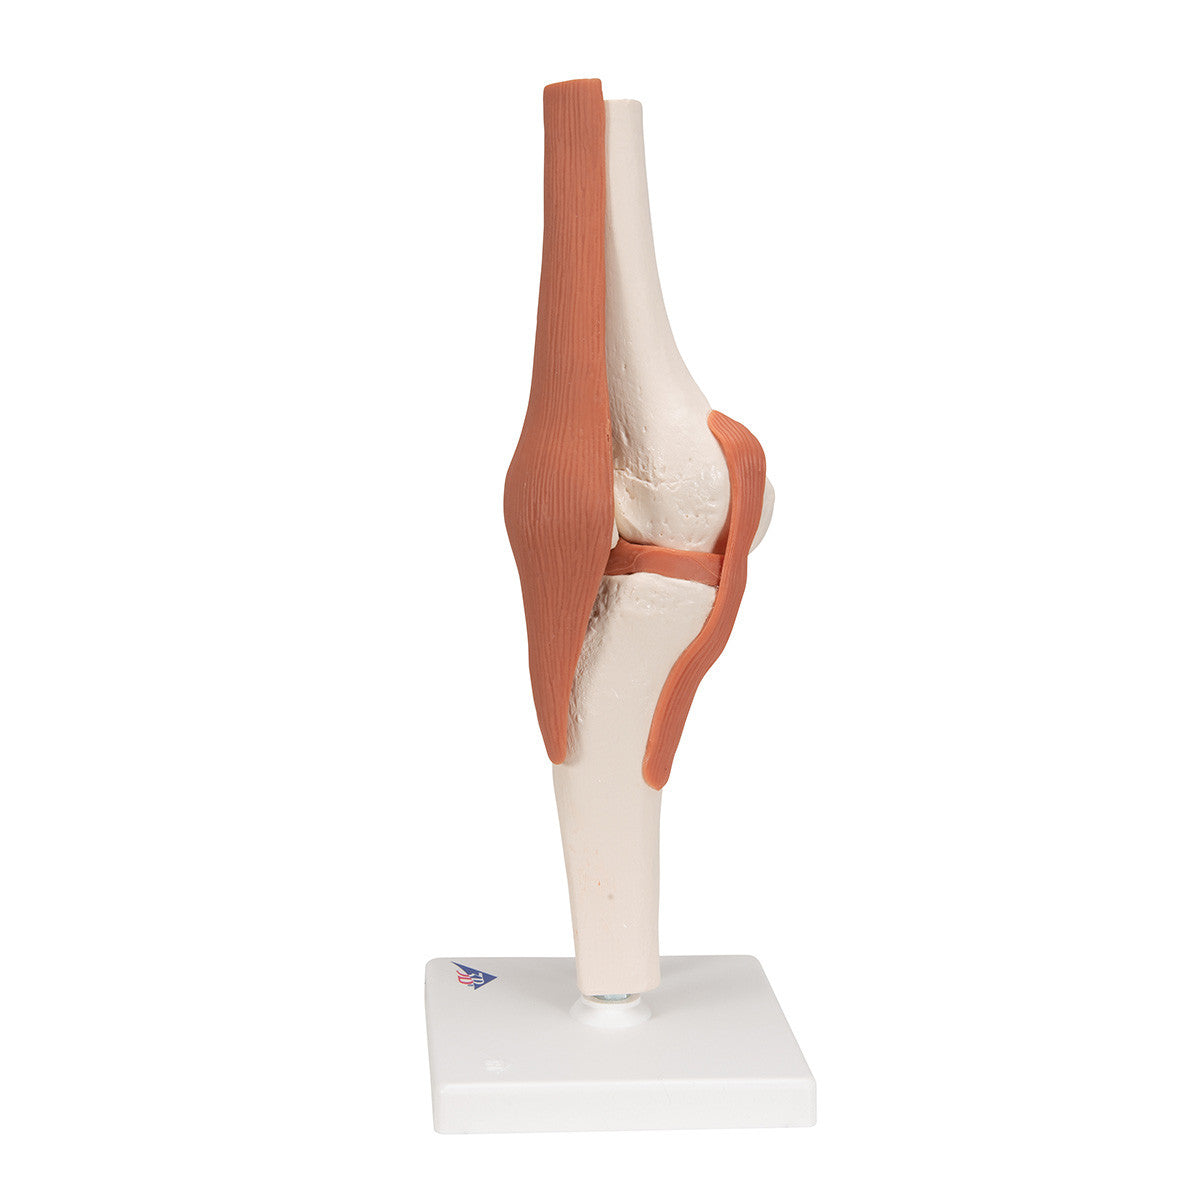 a82_04_1200_1200_functional-human-knee-joint-model-with-ligaments-3b-smart-anatomy__41299.1589753313.1280.1280.jpg